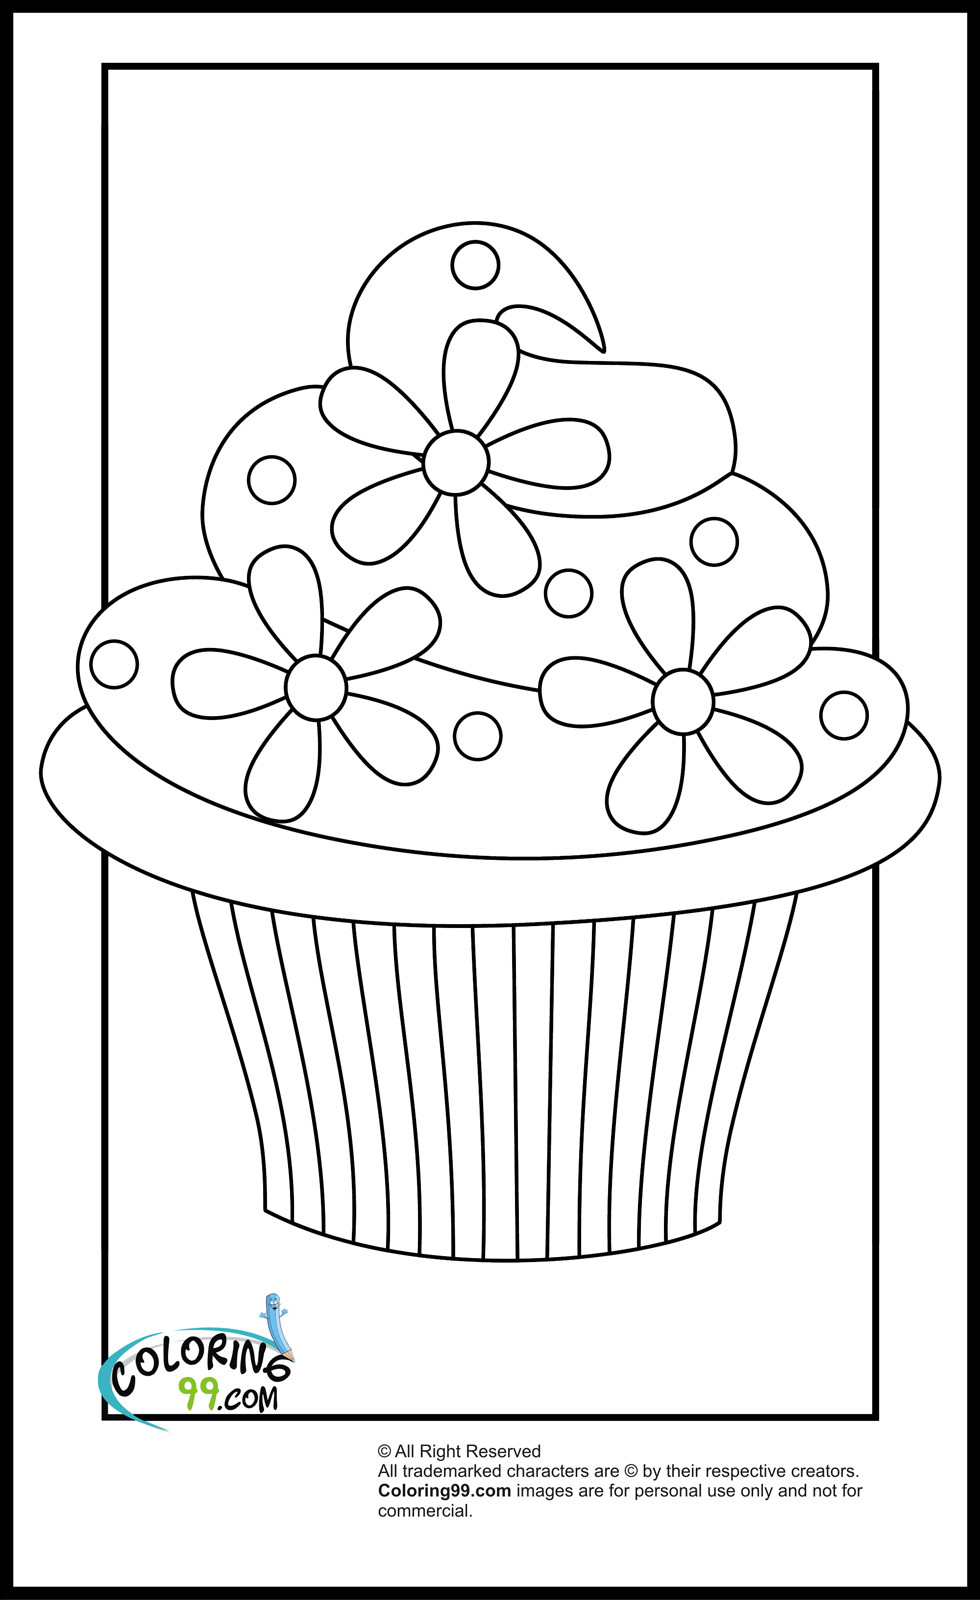 Printable Kids Coloring Sheets
 Cupcake Coloring Pages